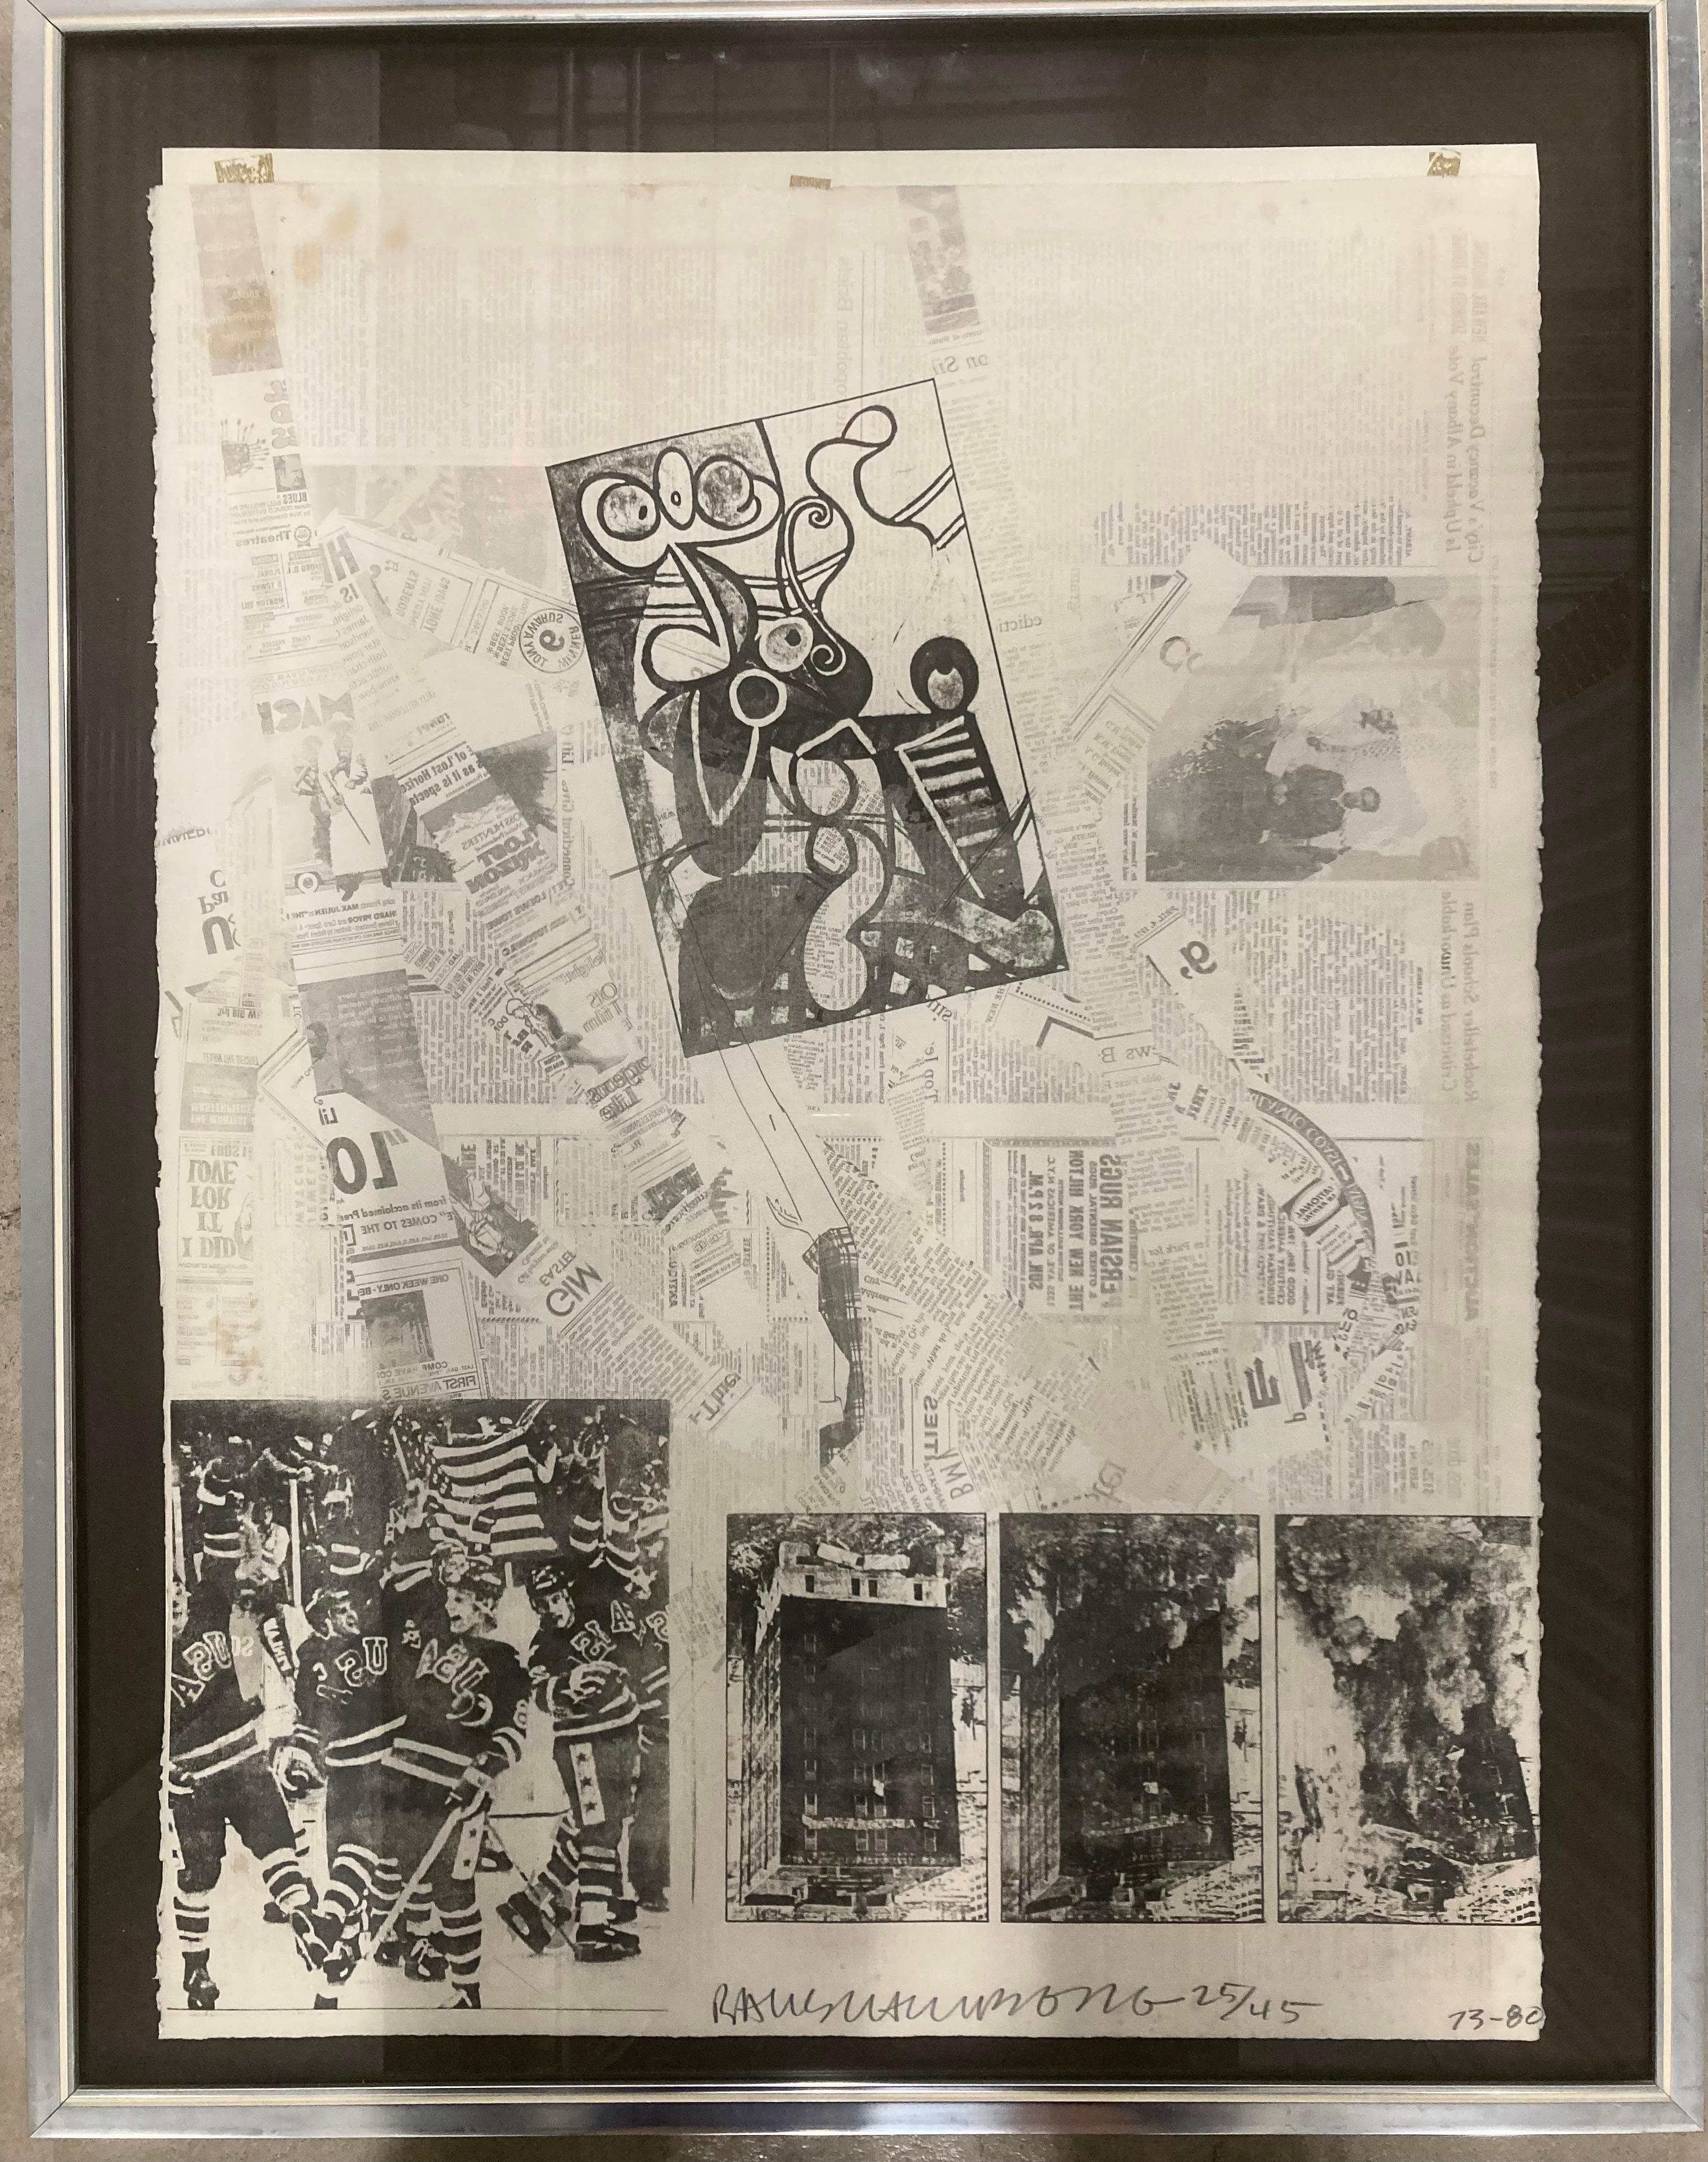 “After Homage to Picasso“ - Print by Robert Rauschenberg